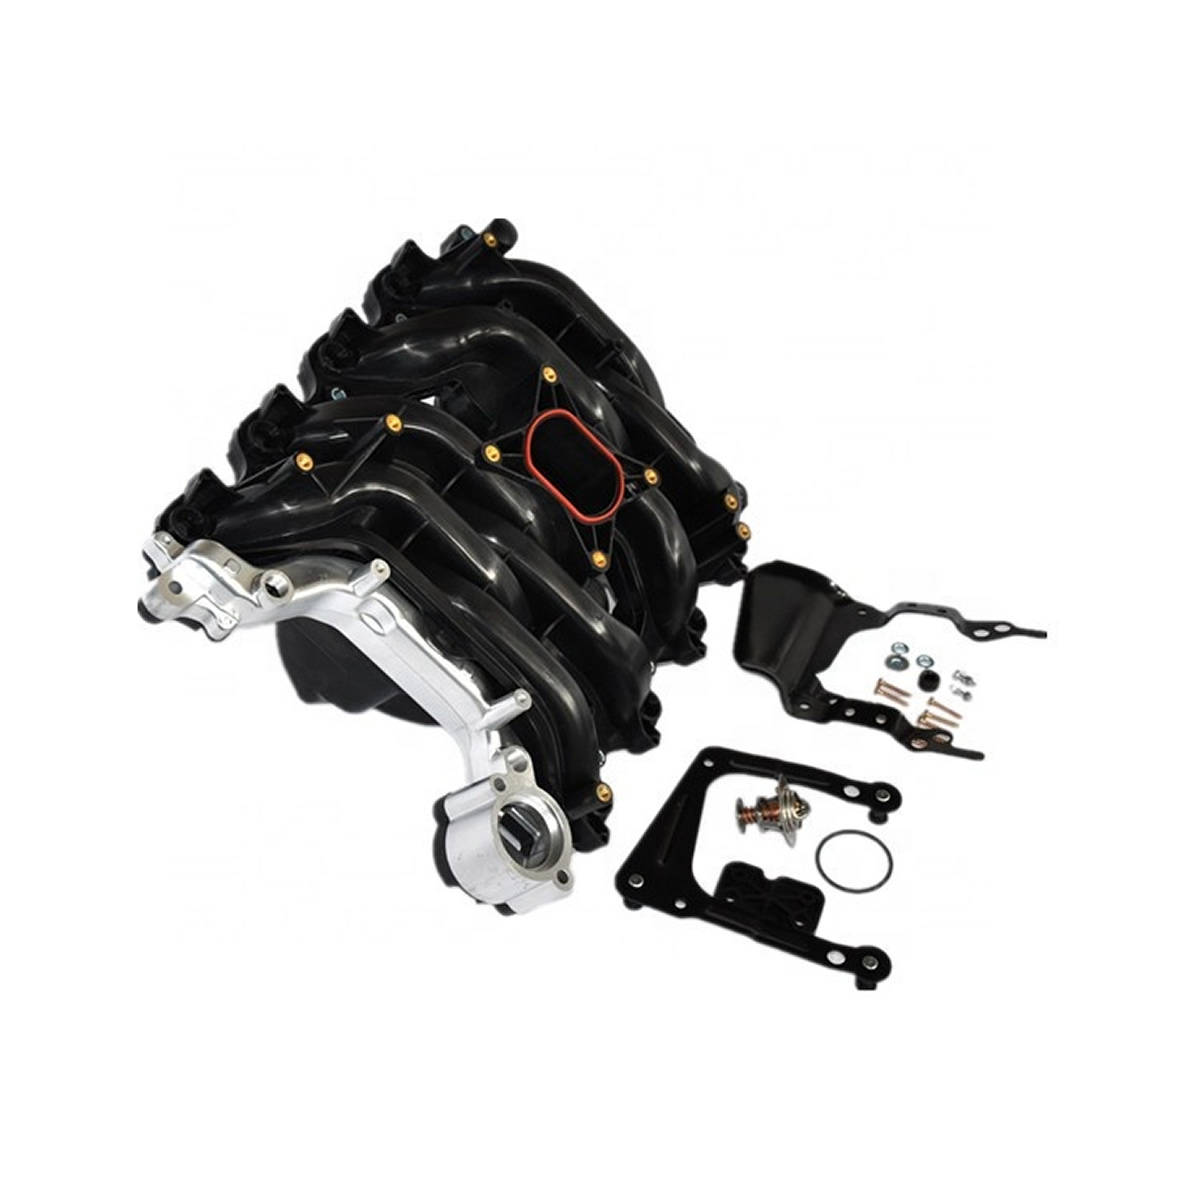 Intake manifold  for Ford Crown Victoria